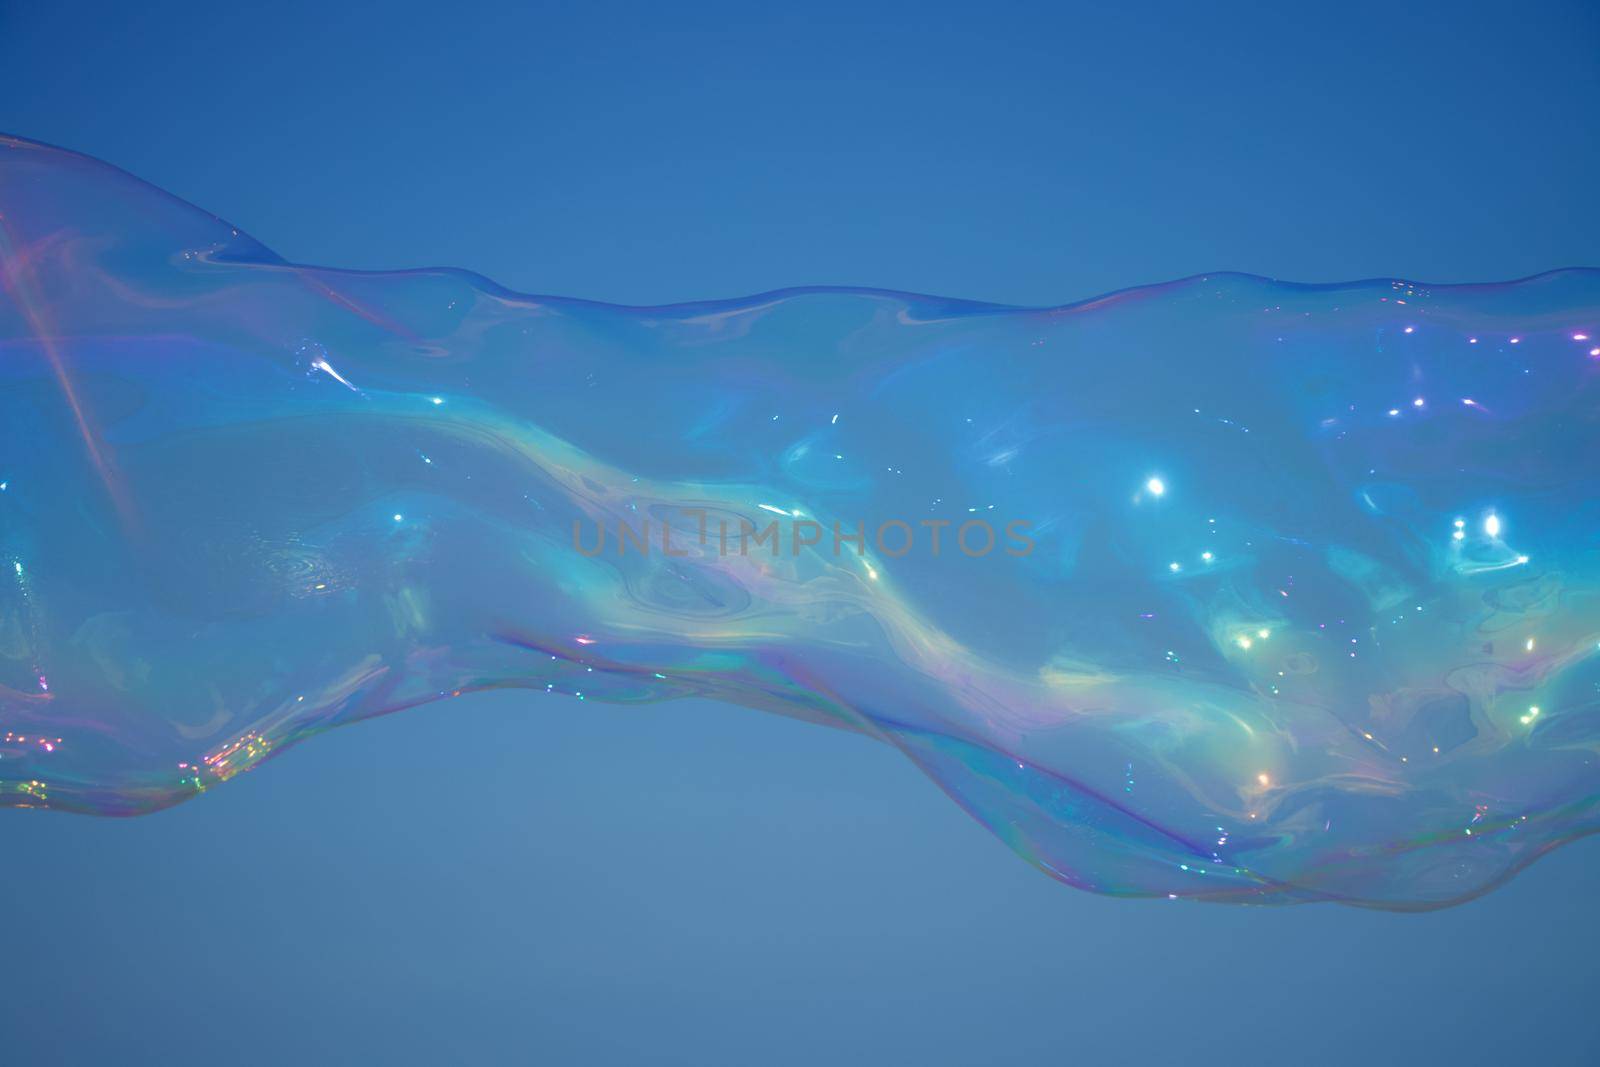 Giant colourful soap bubble stretching across the blue sky by StefanMal